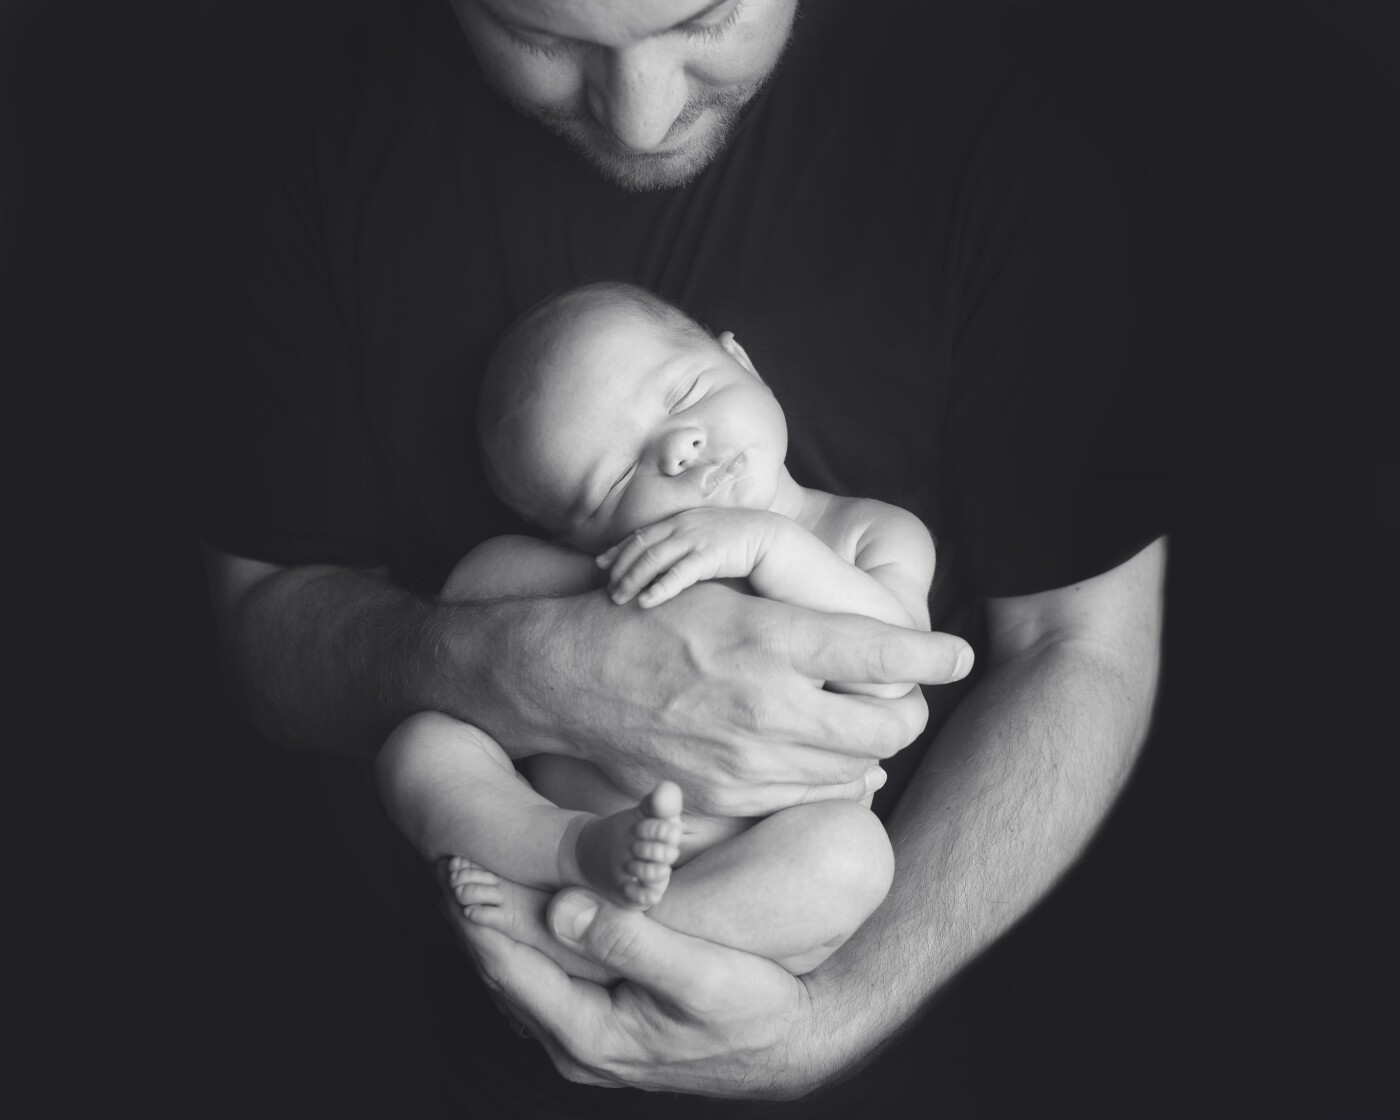 This pose is my favorite for the new Dad.  It really shows the contrast of just how small baby is.  Safe and secure in Dad's hands.